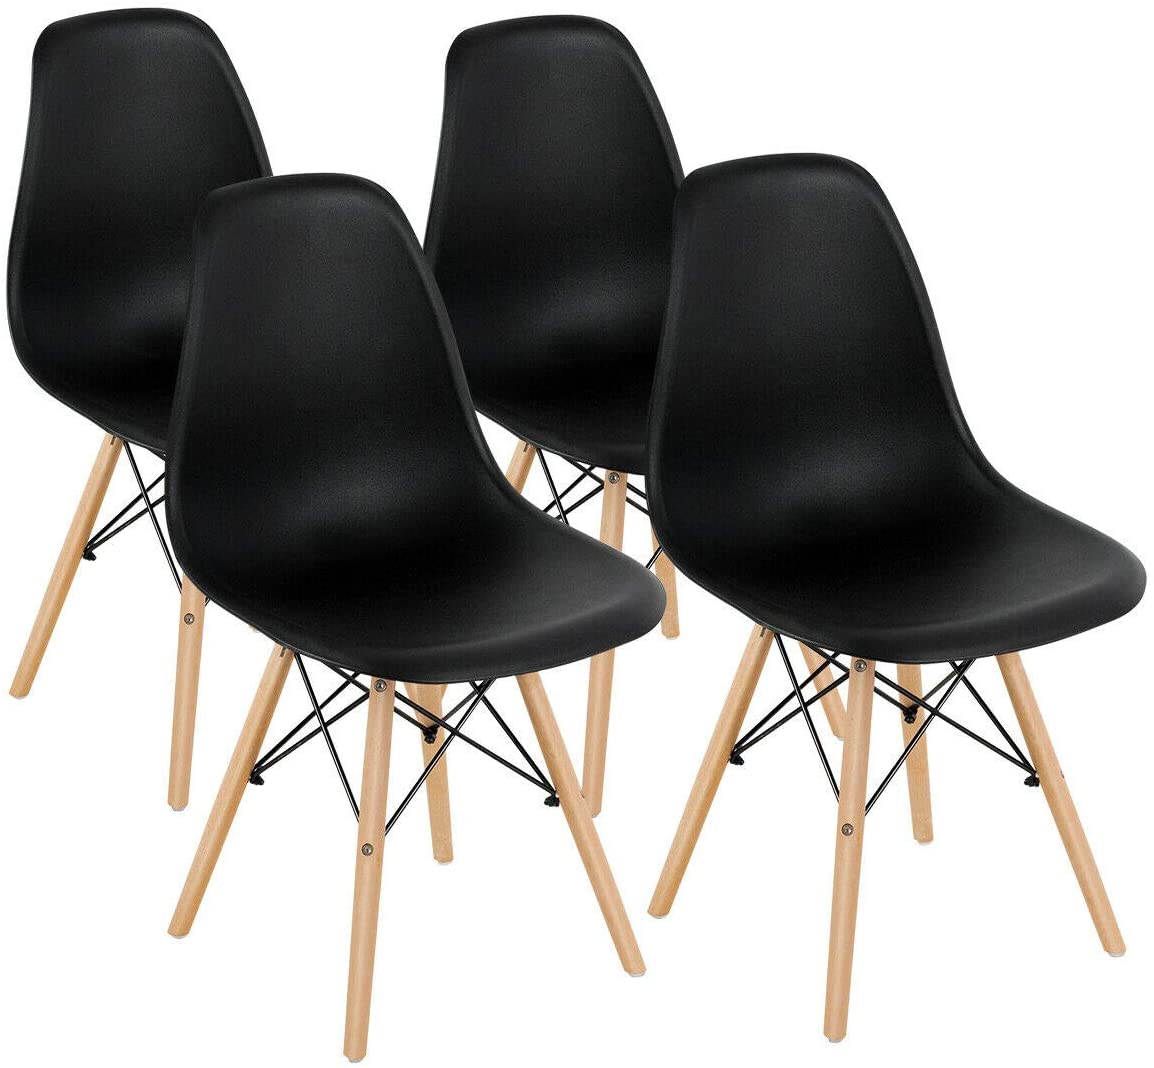 B08H1CKG3R Black Mid Century Modern Dining Chairs Set of 4 for Kitchen and Dining Room, Curved Side Chair with Wood Legs, Cafe Home Accent Furniture